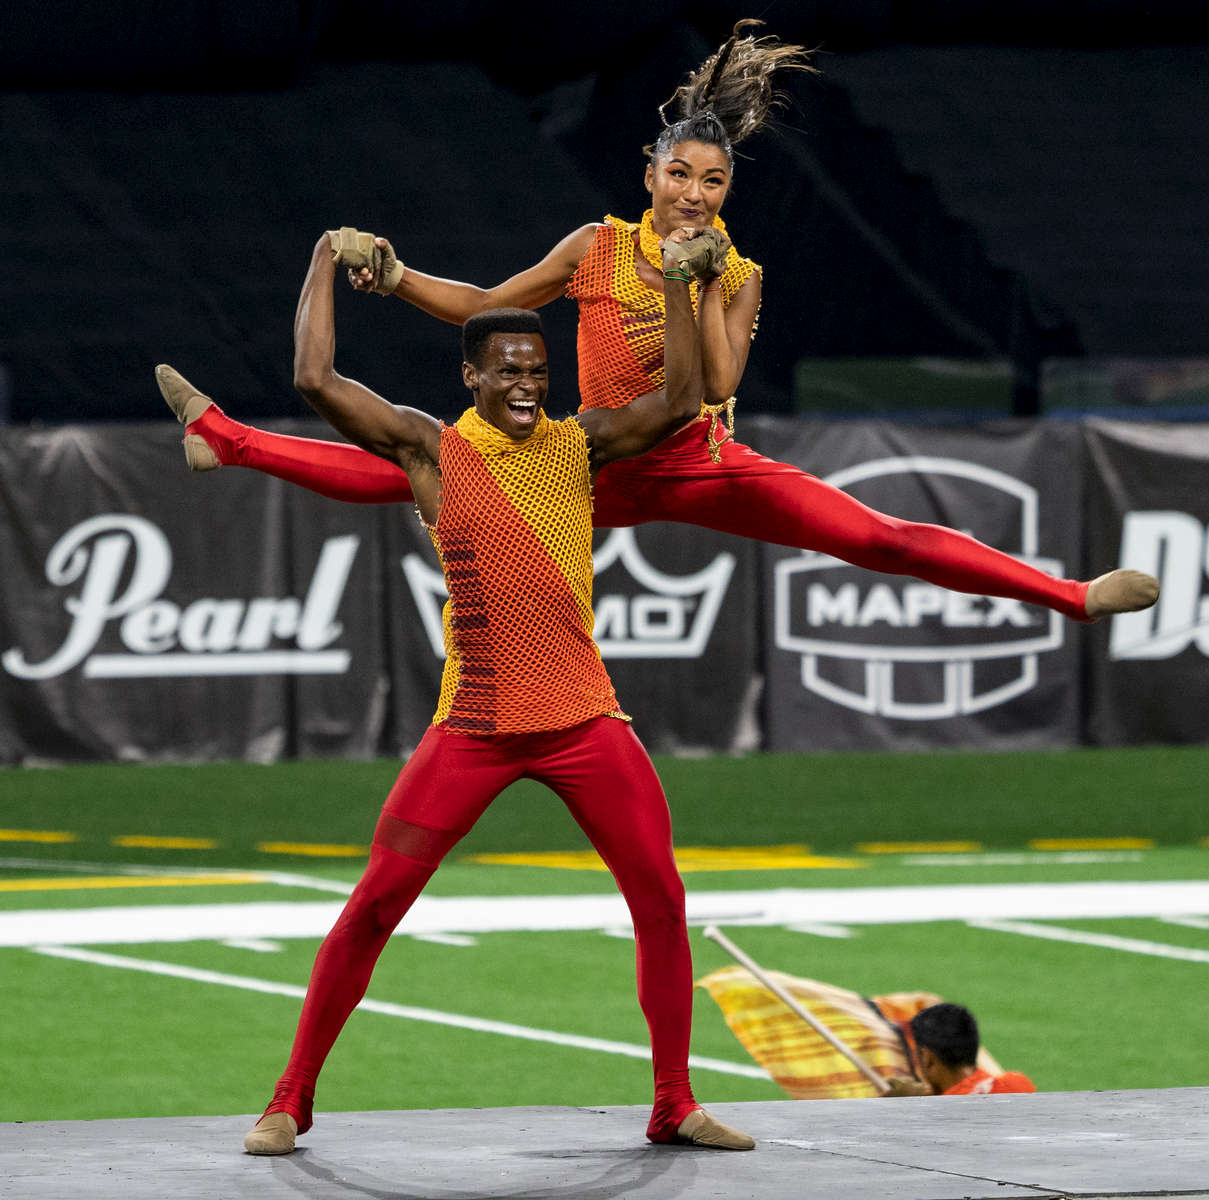 Photos from my seat of THE SANTA CLARA VANGUARD, 2018 DCI World Class Champion, with a score of 98.625.